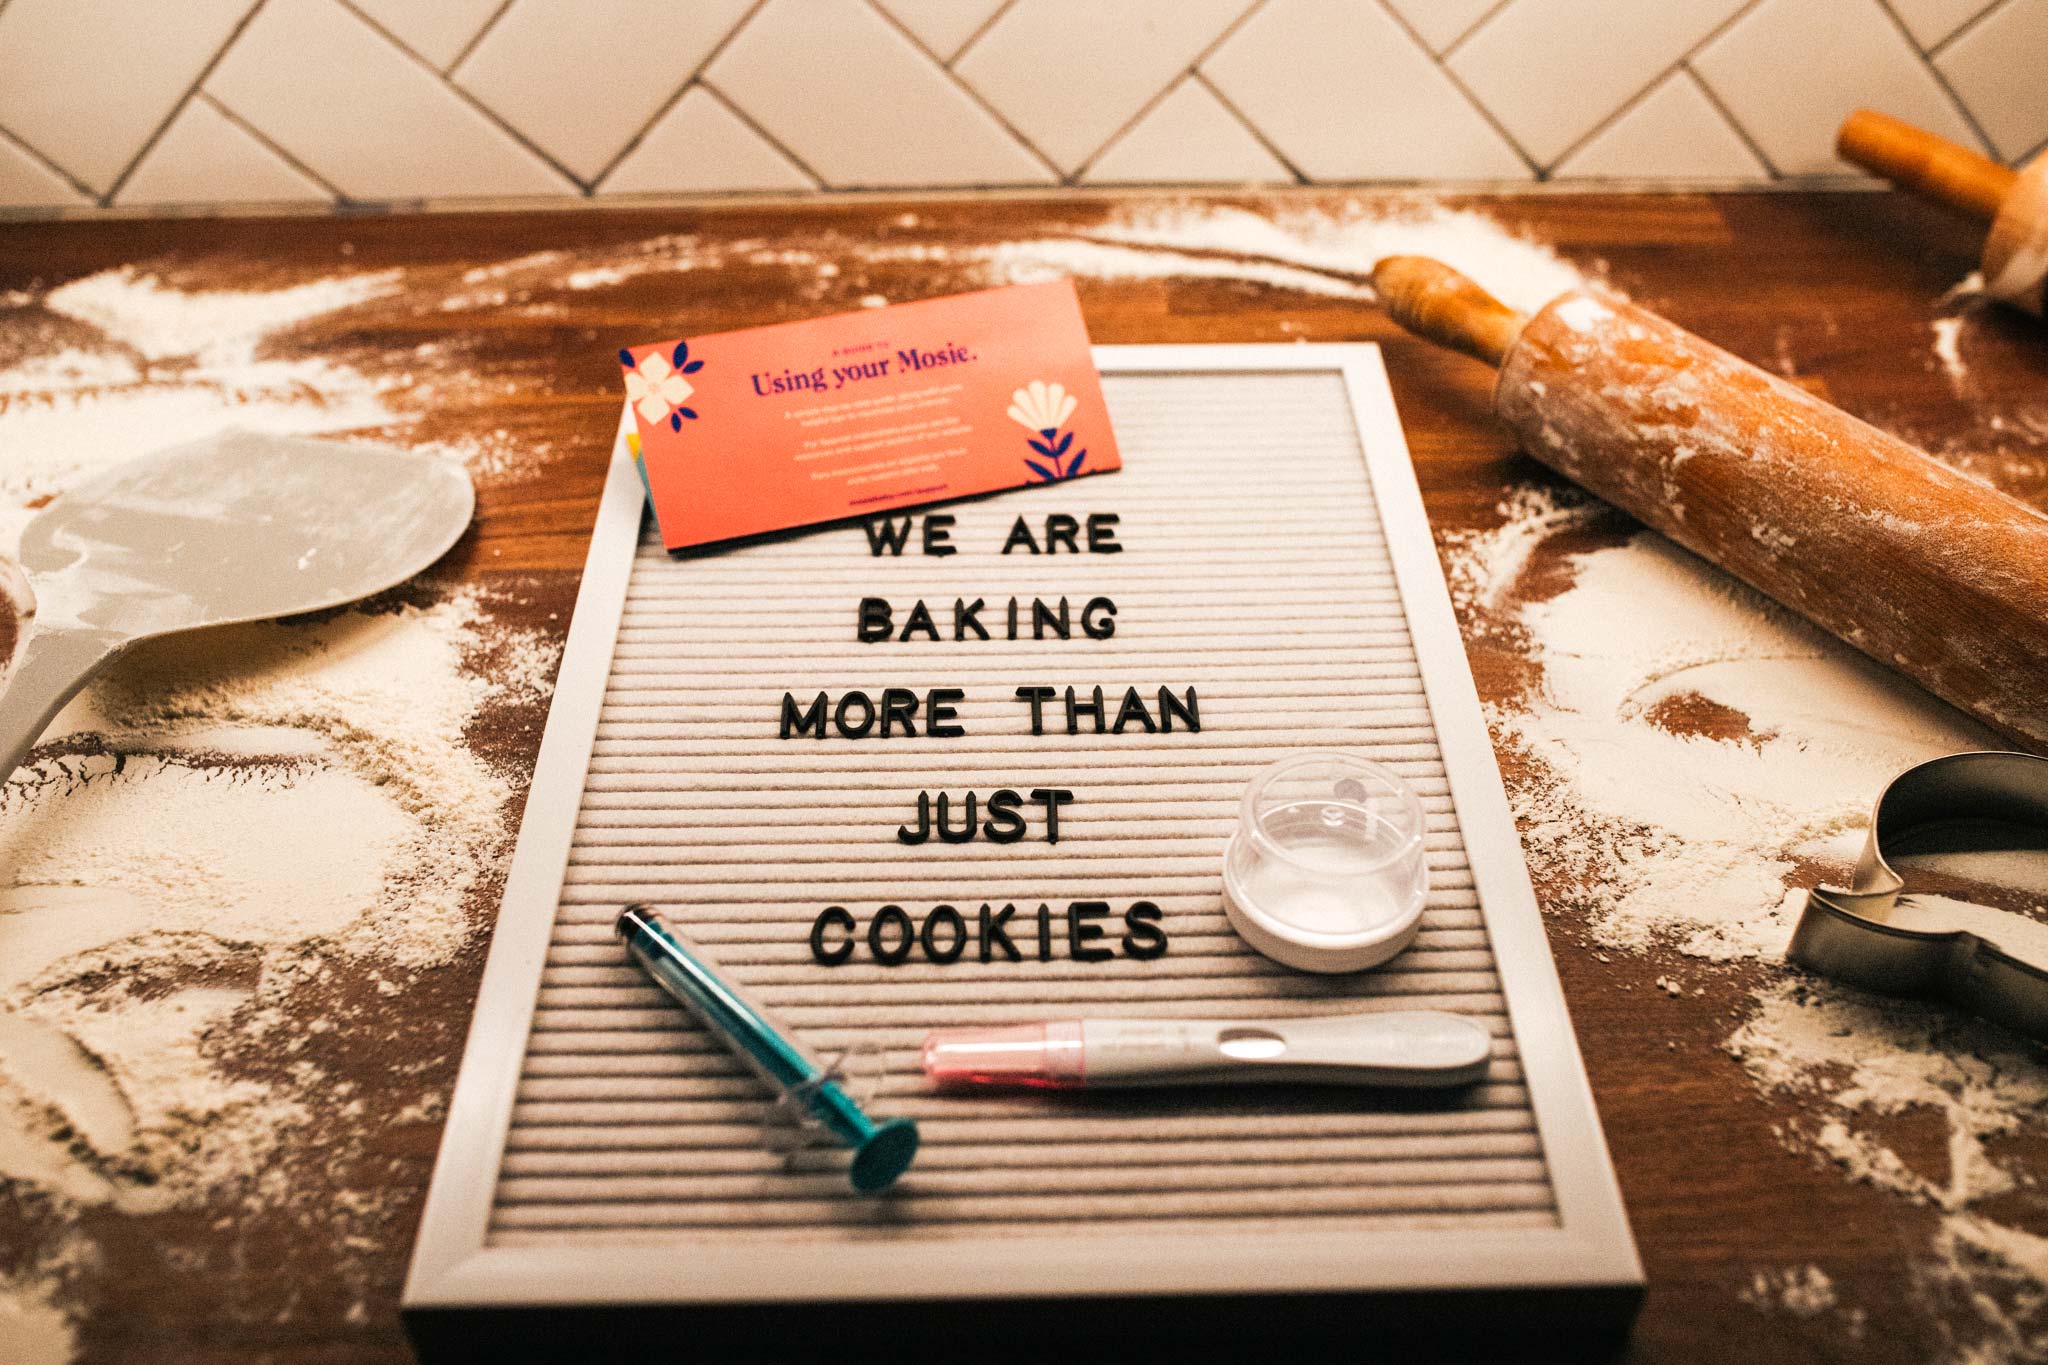 Mosie Baby announcement on letterboard that reads "We are baking more than just cookies" on flour covered counter with baking tools, positive Mosie Baby pregnancy test and Mosie Baby Kit.